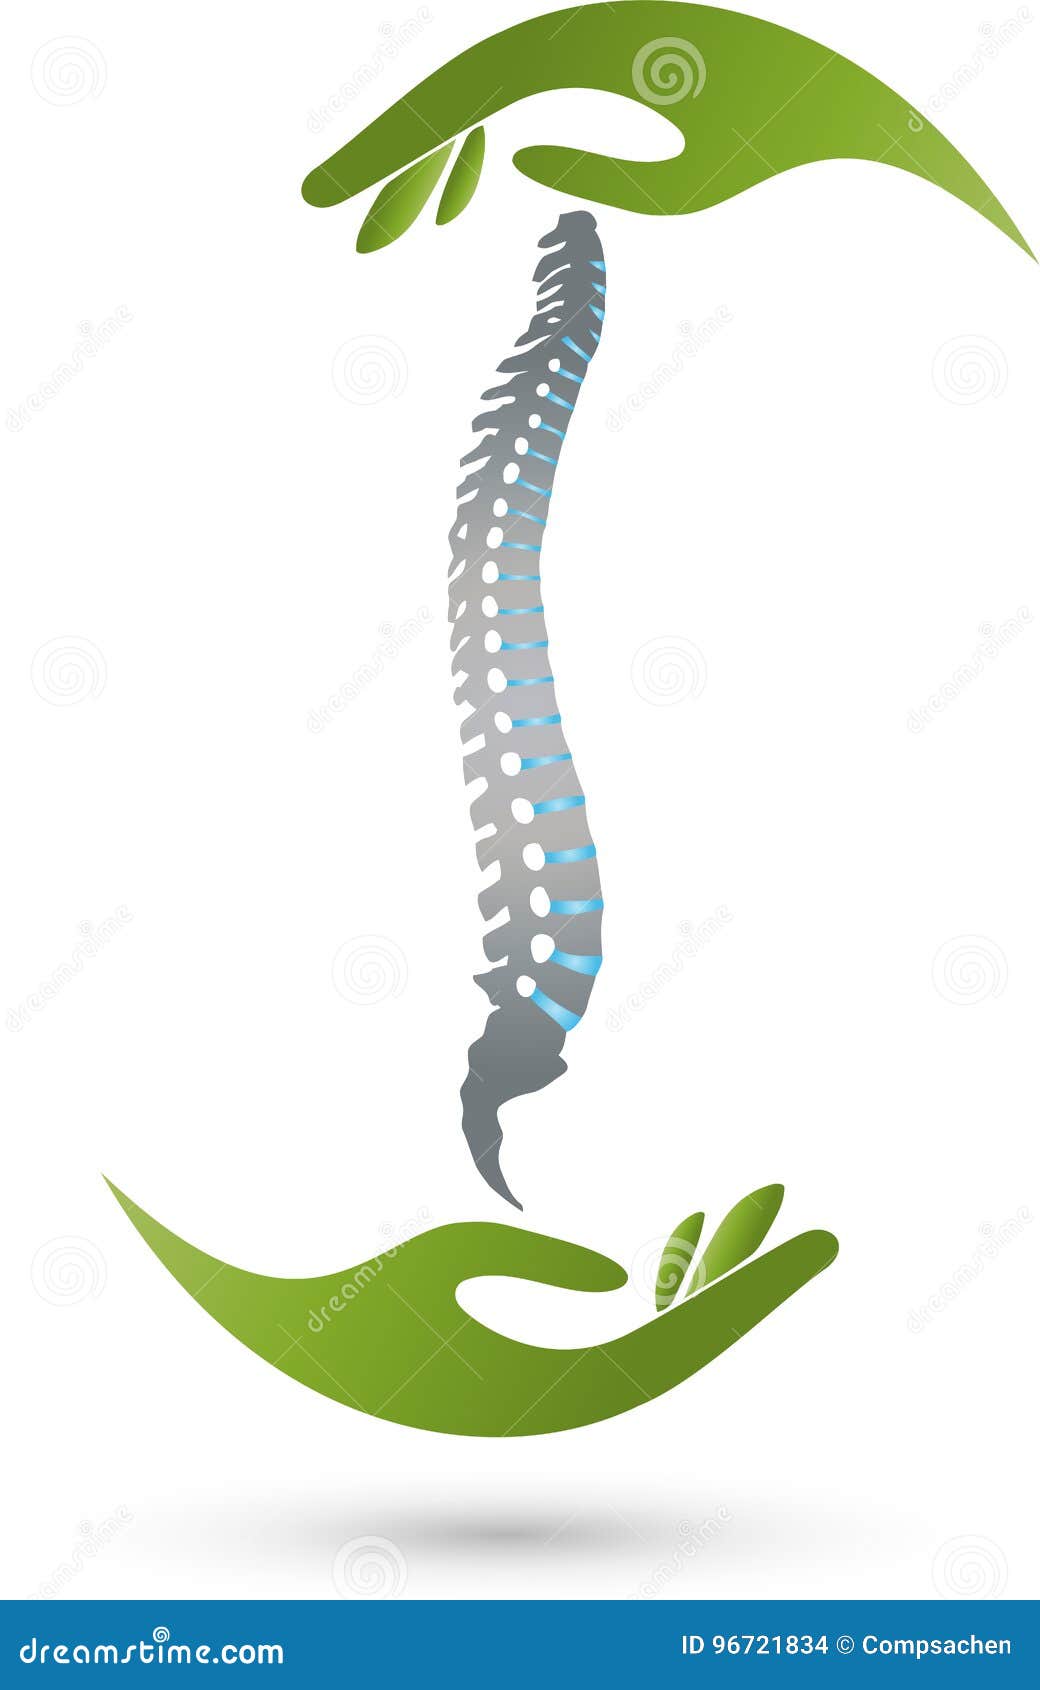 two hands and spine, orthopedics and massage logo